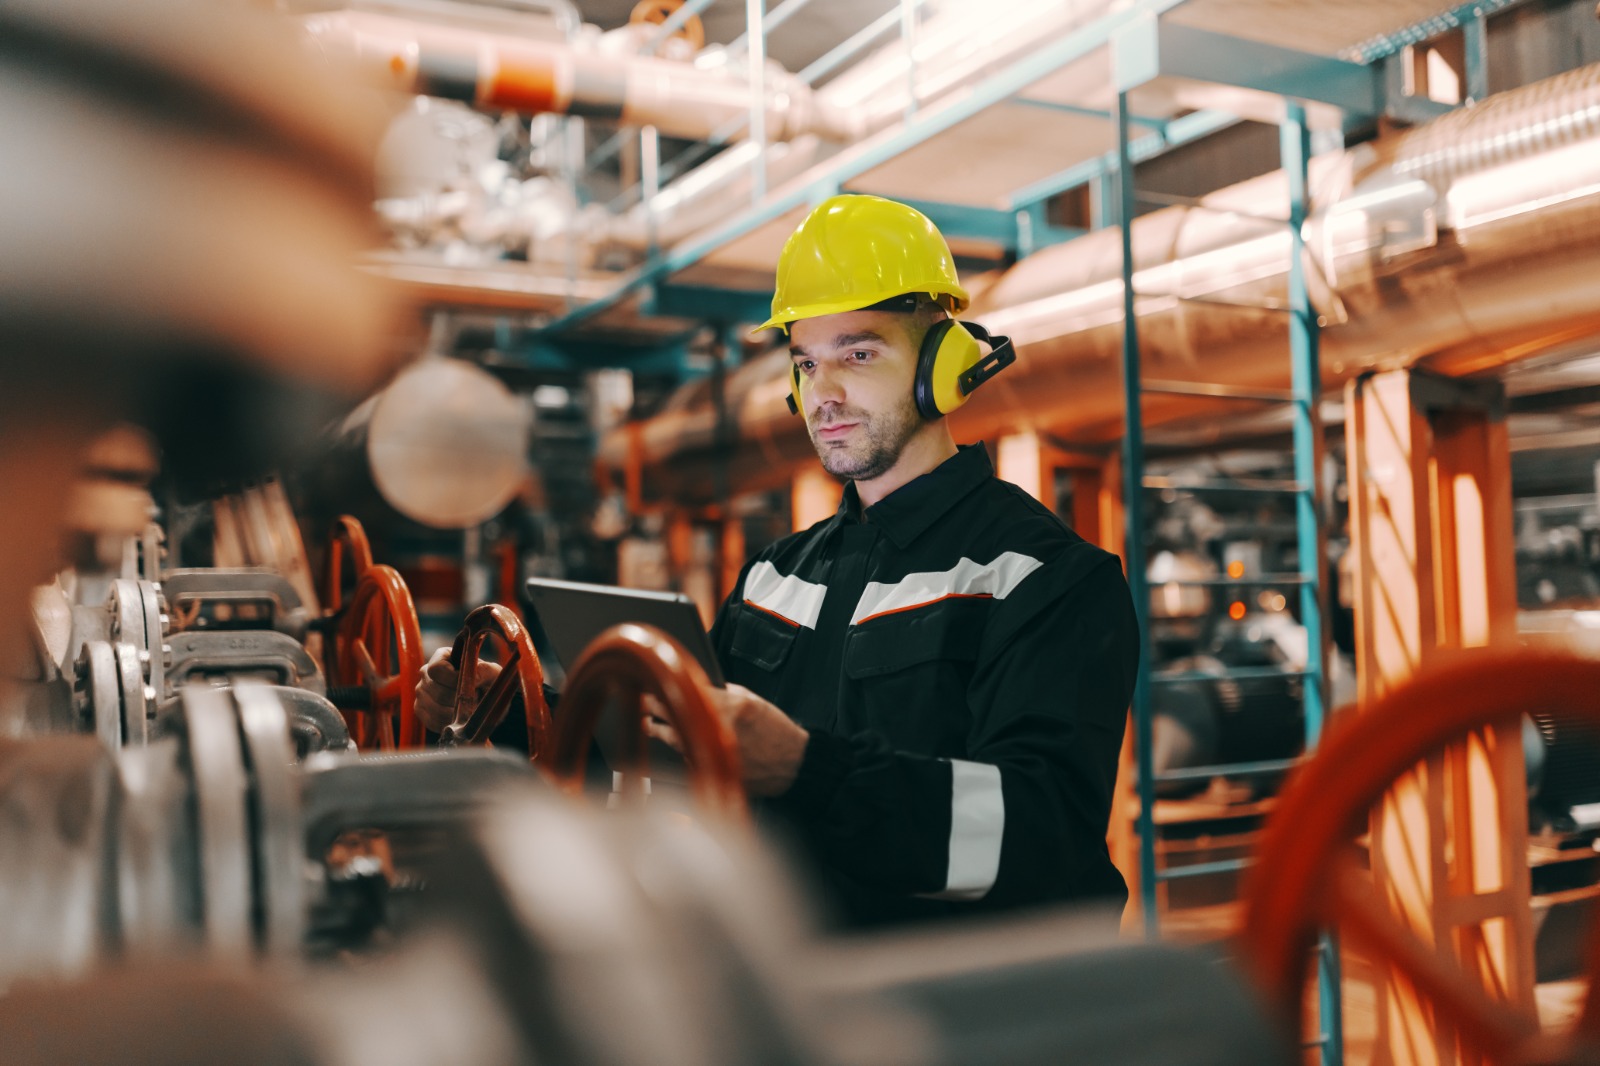 predictive maintenance provides increased productivity throughout the plant.